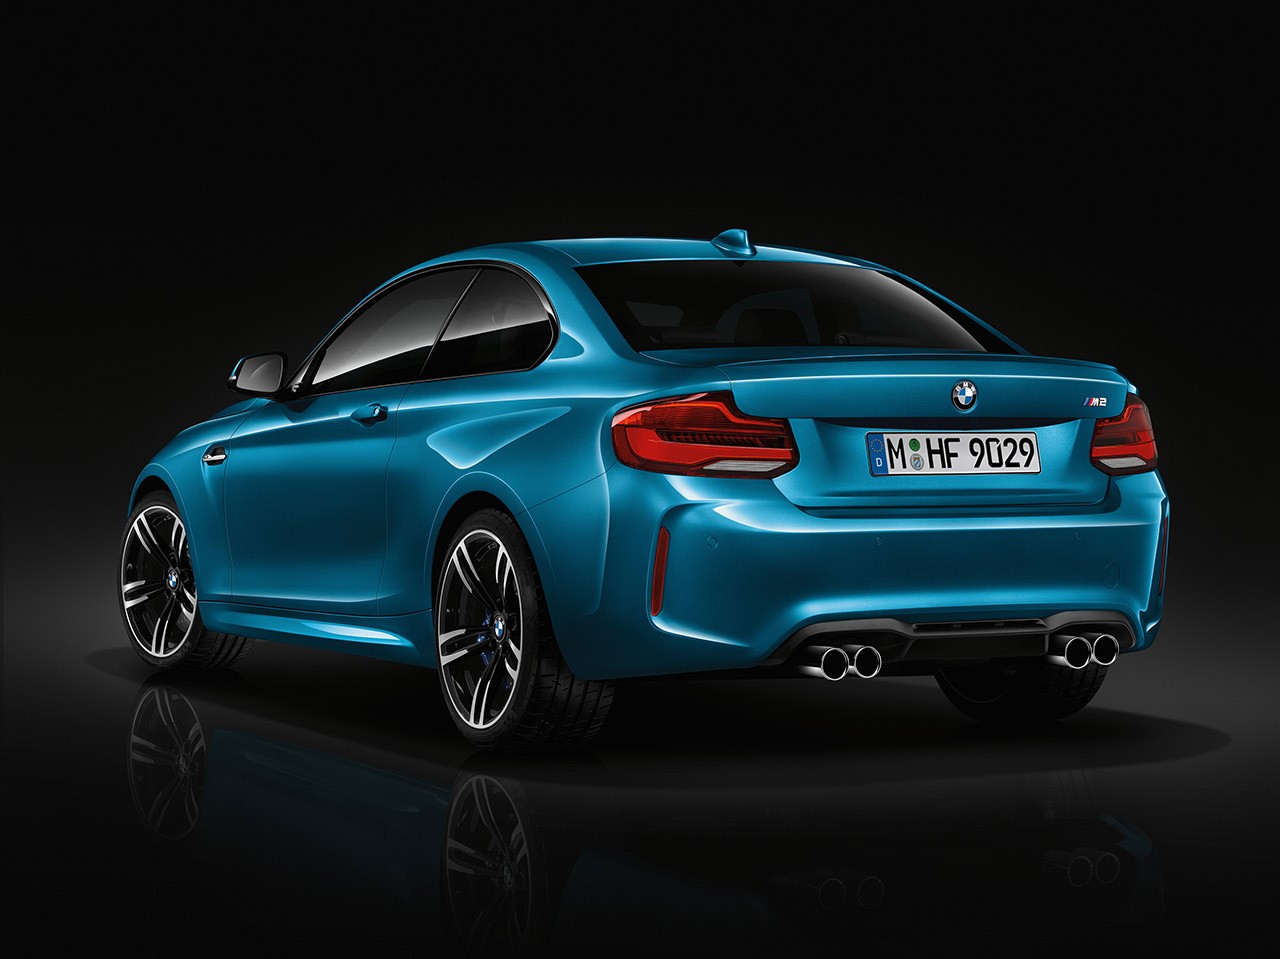 2018 BMW 2 Series images